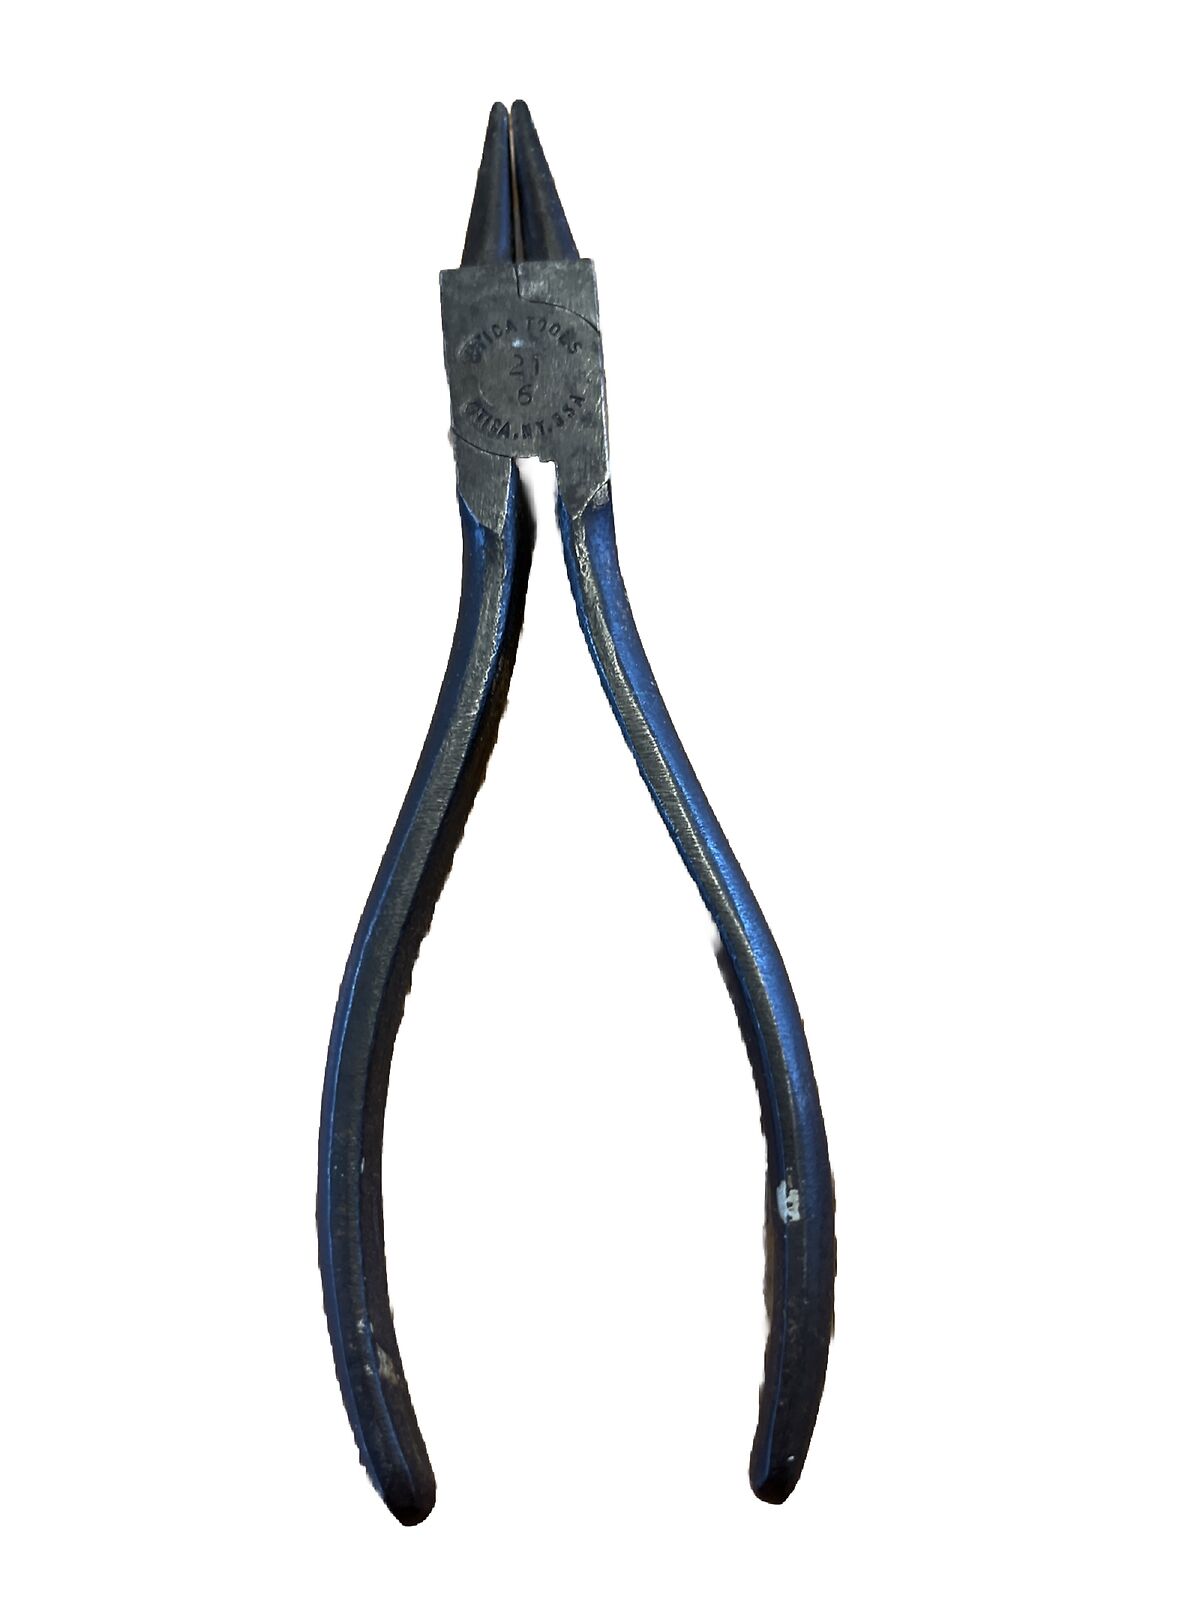 UTICA TOOLS No. 21 6 Round Nose Pliers Electronics Jewelry Making Wire Work 6”